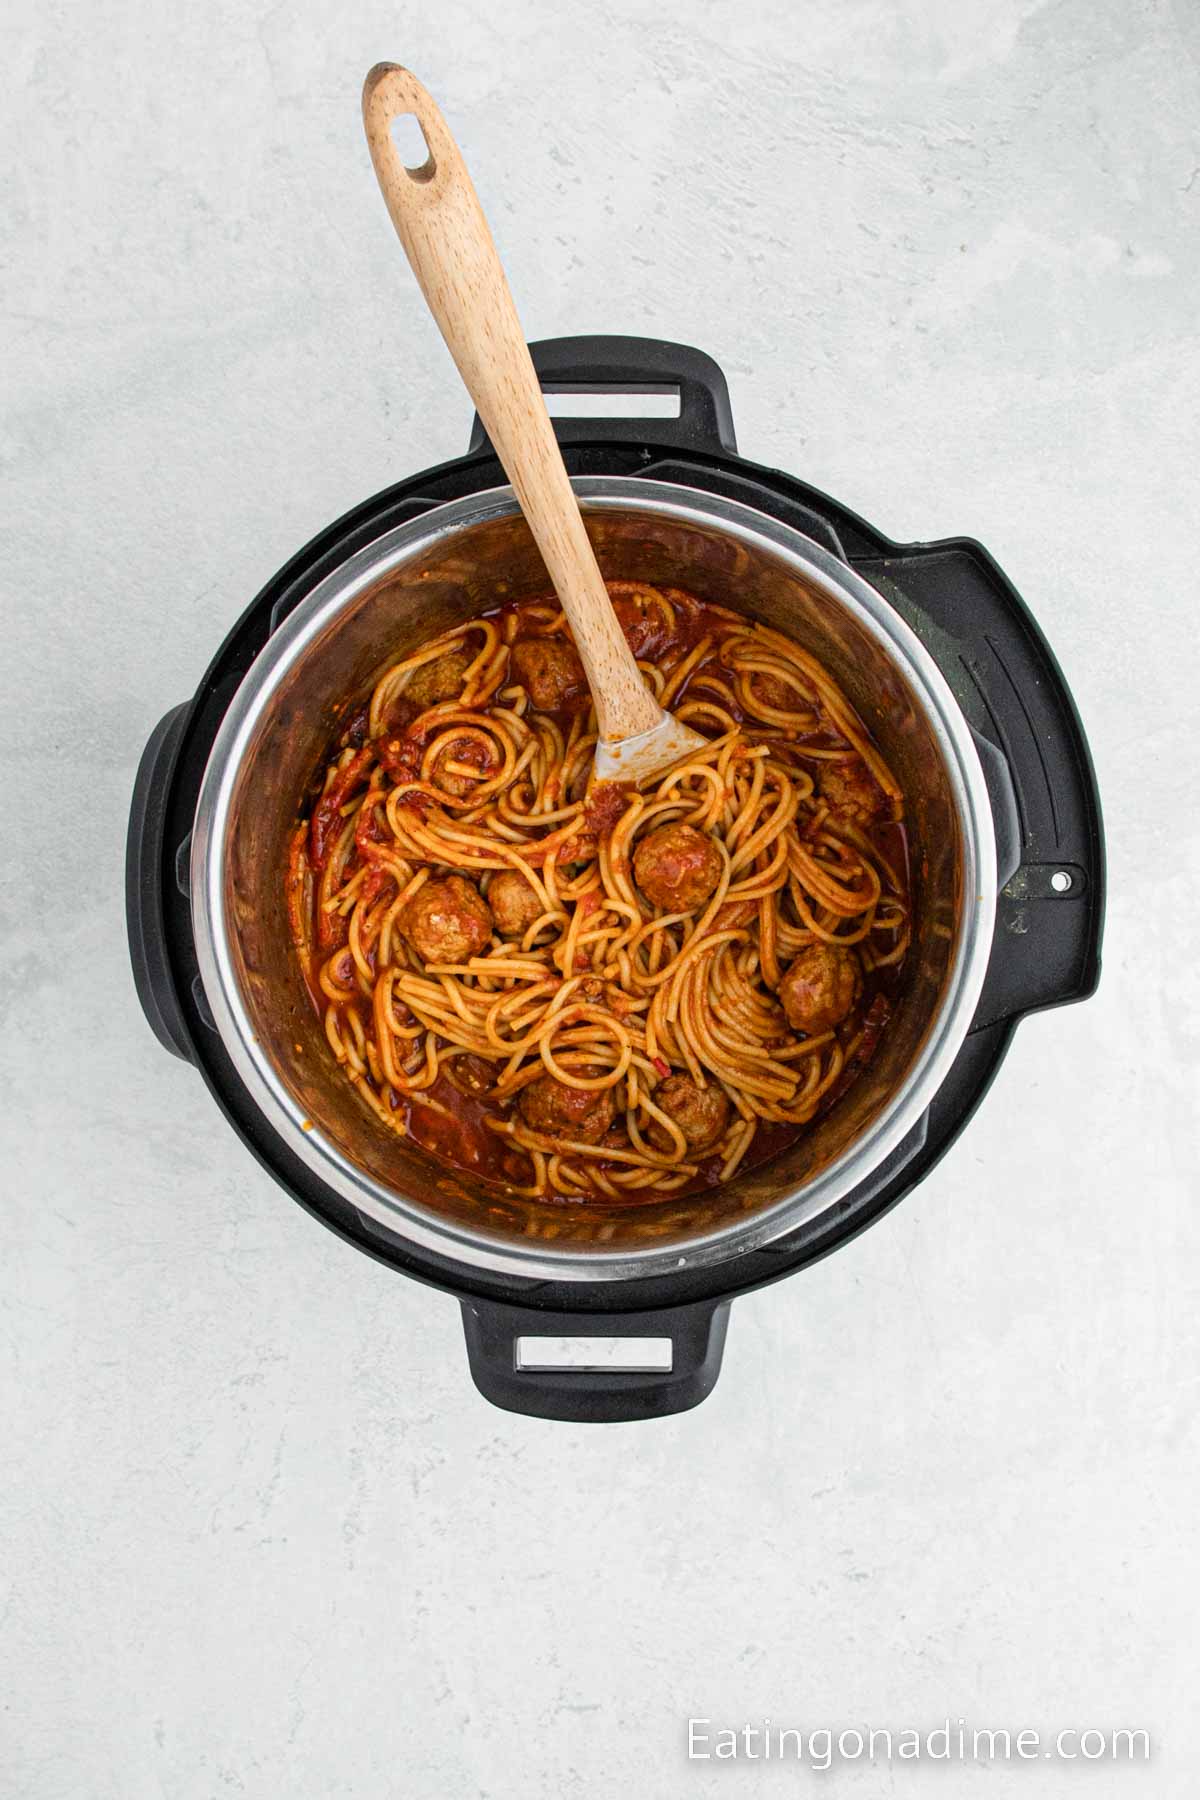 Spaghetti and Meatballs in a pressure cooker with a wooden spoon